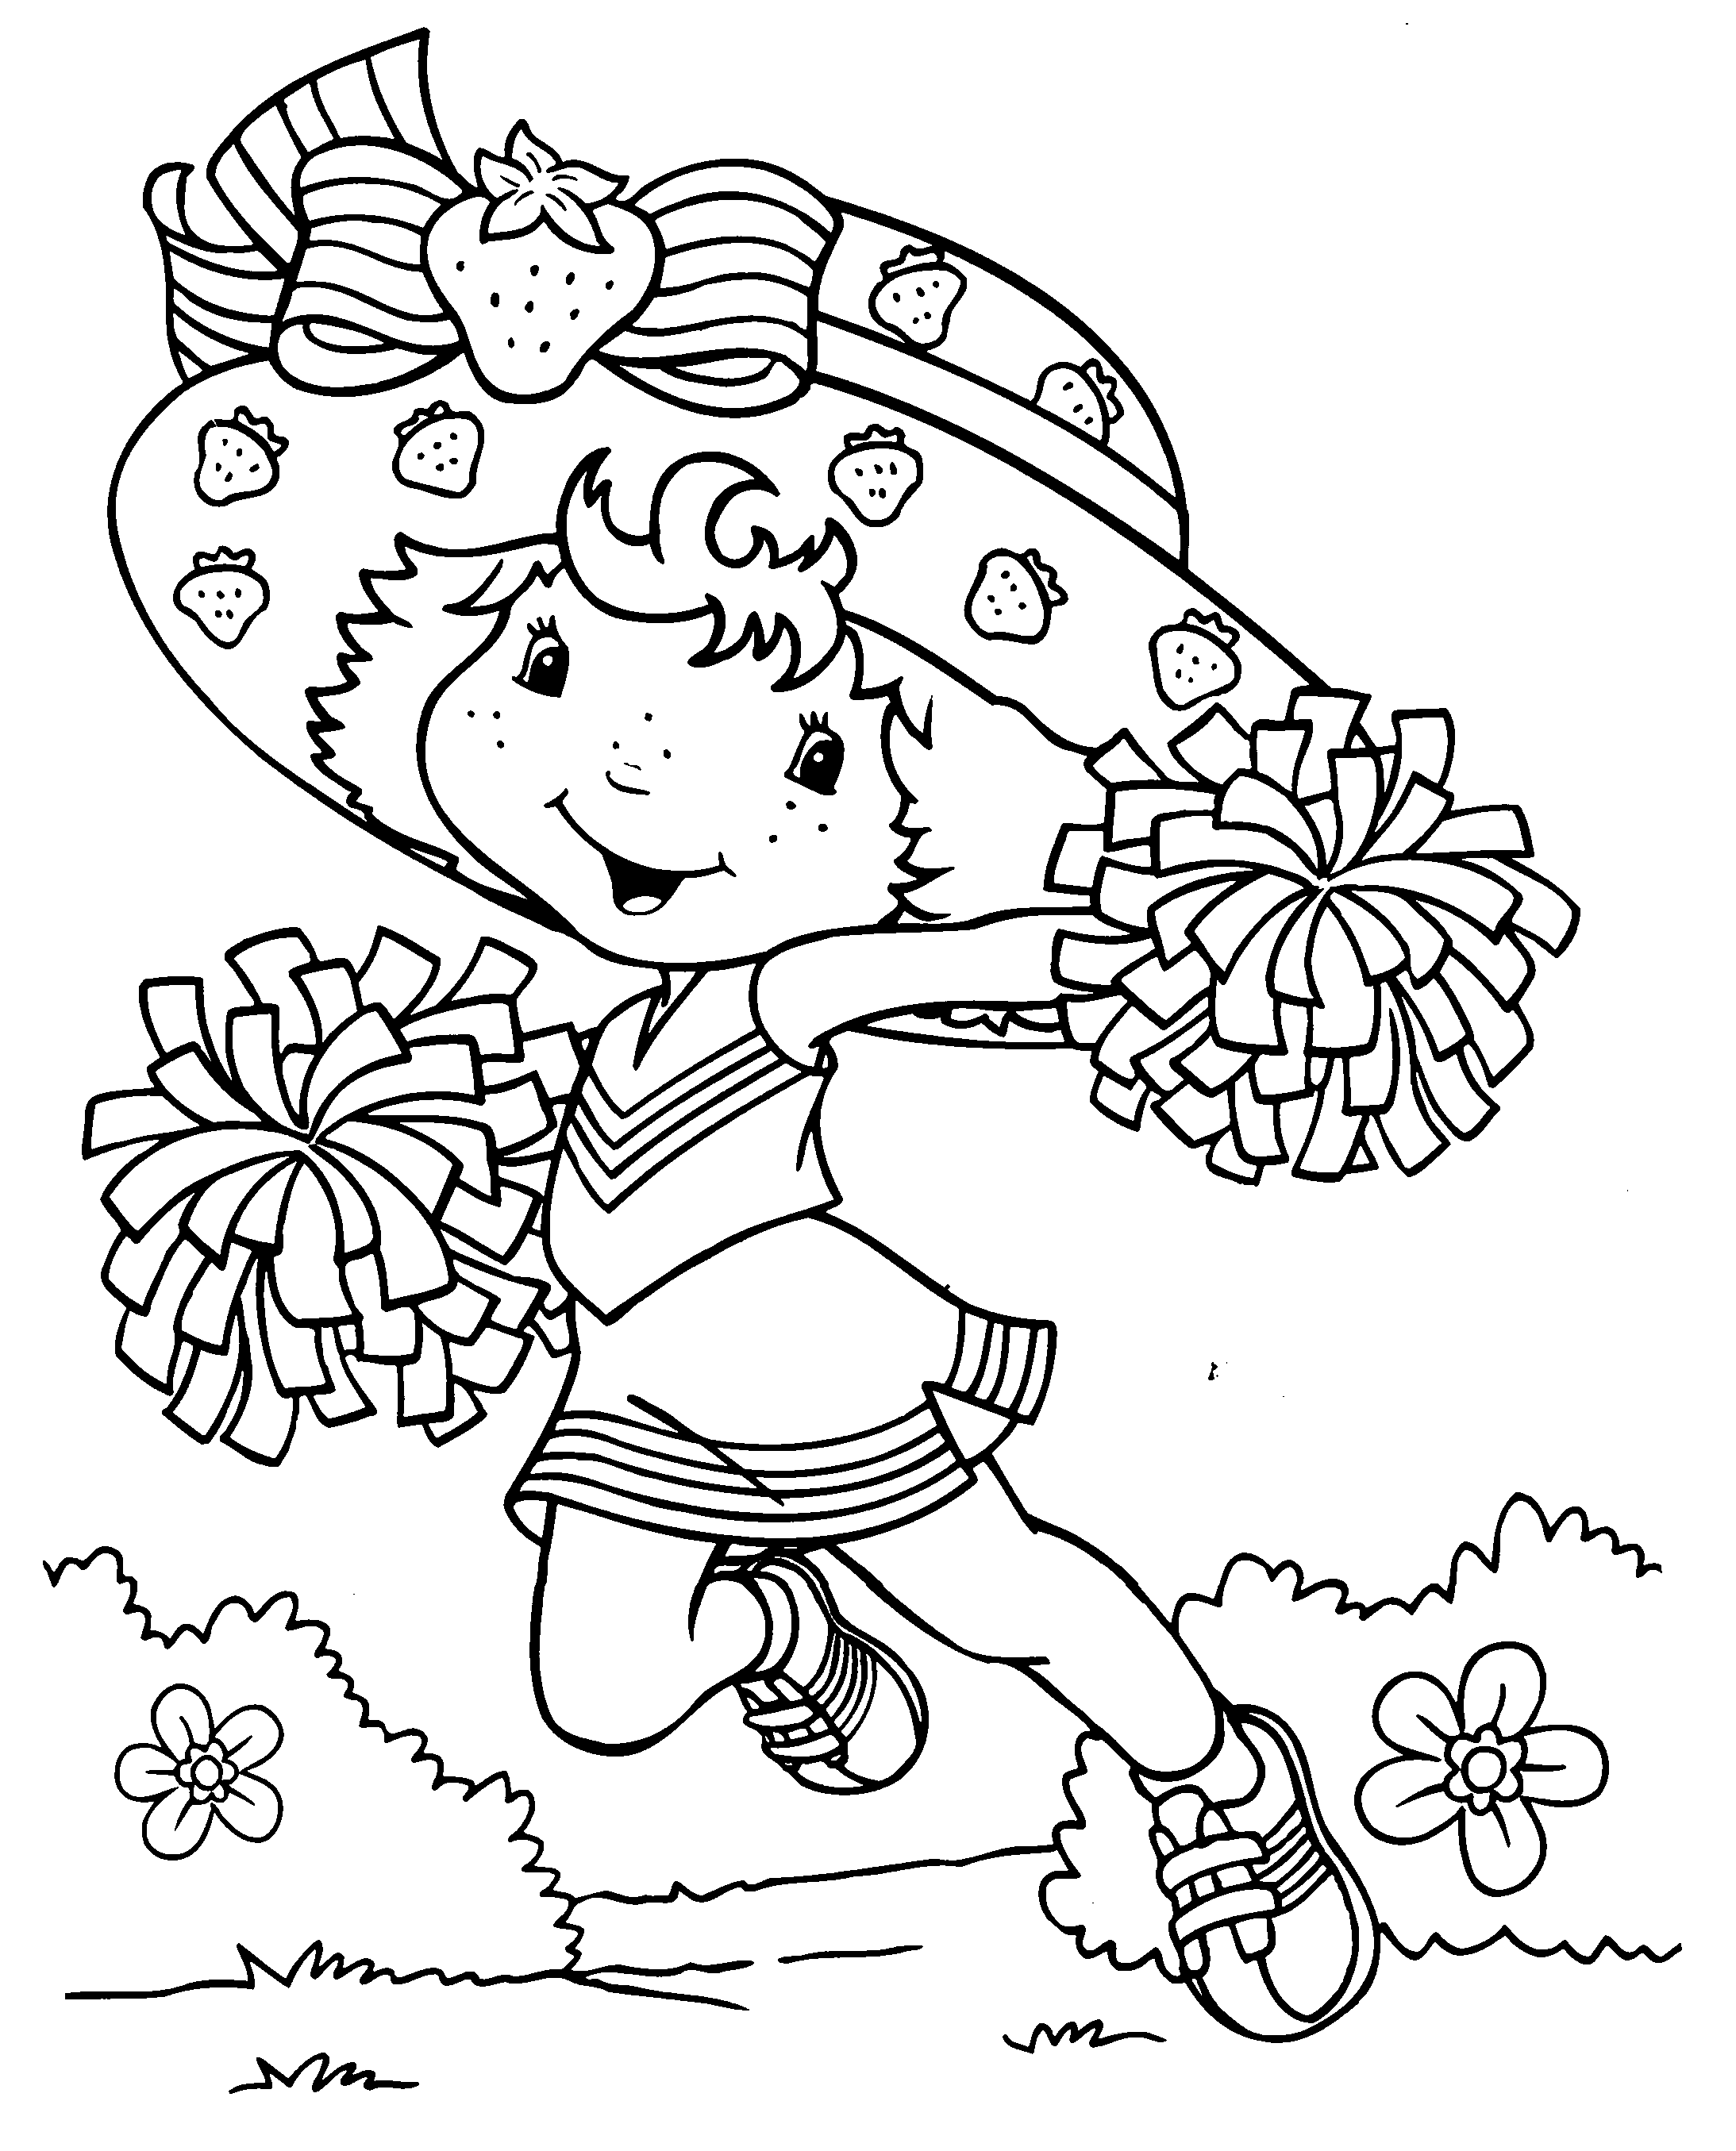 Strawberry shortcake coloring pages to download